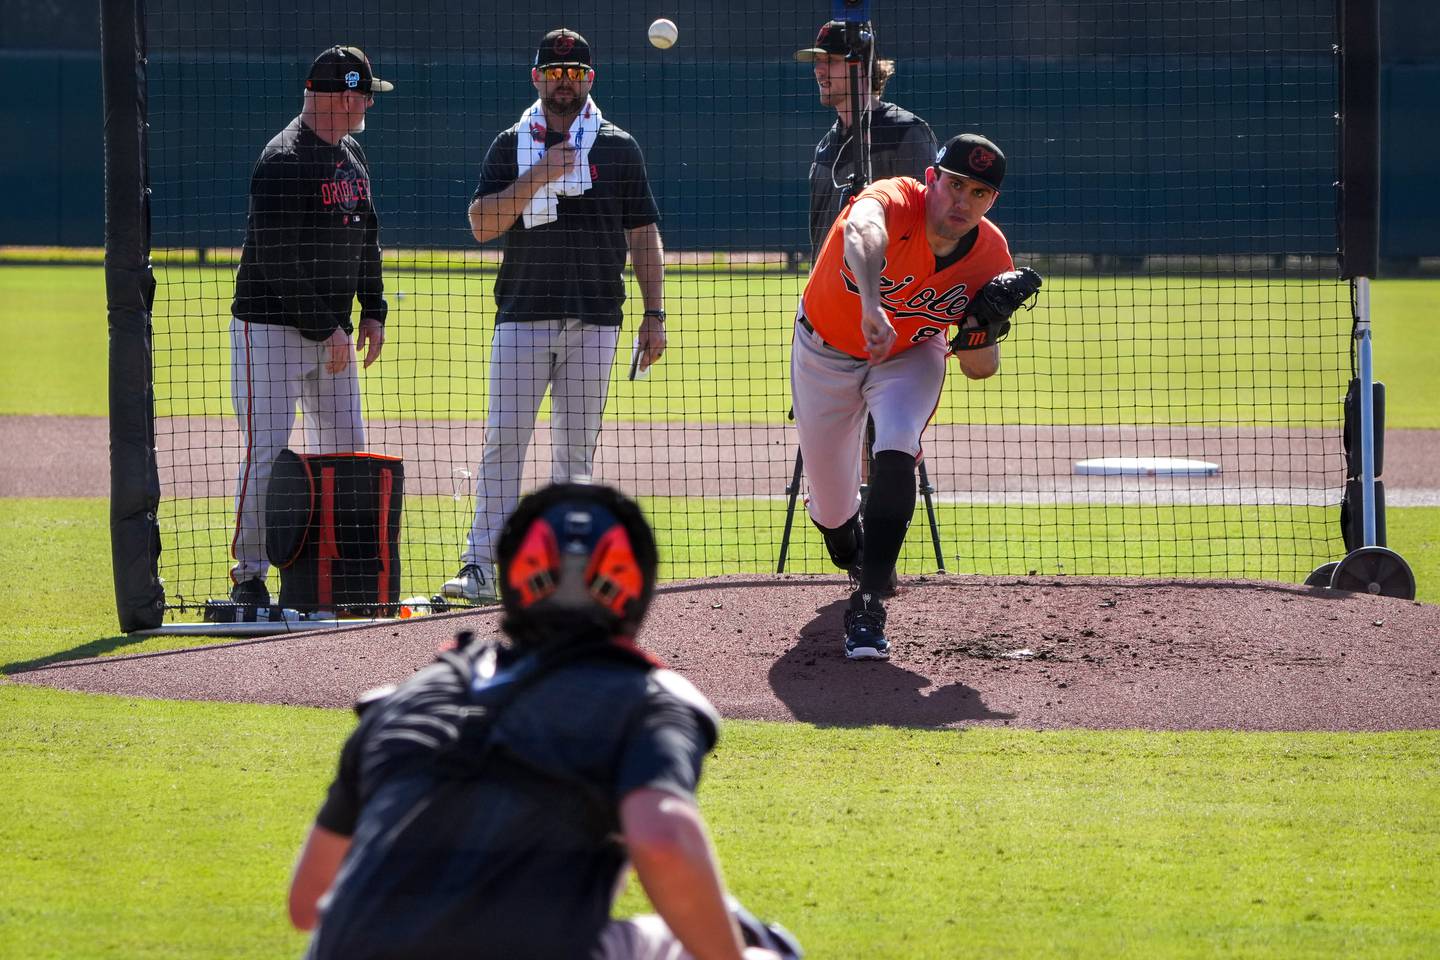 RHP Grayson Rodriguez delivers a pitch to catcher Adley Rutschman at Ed Smith Stadium in Sarasota on 2/22/23. The Baltimore Orioles’ Spring Training session runs from mid-February through the end of March.